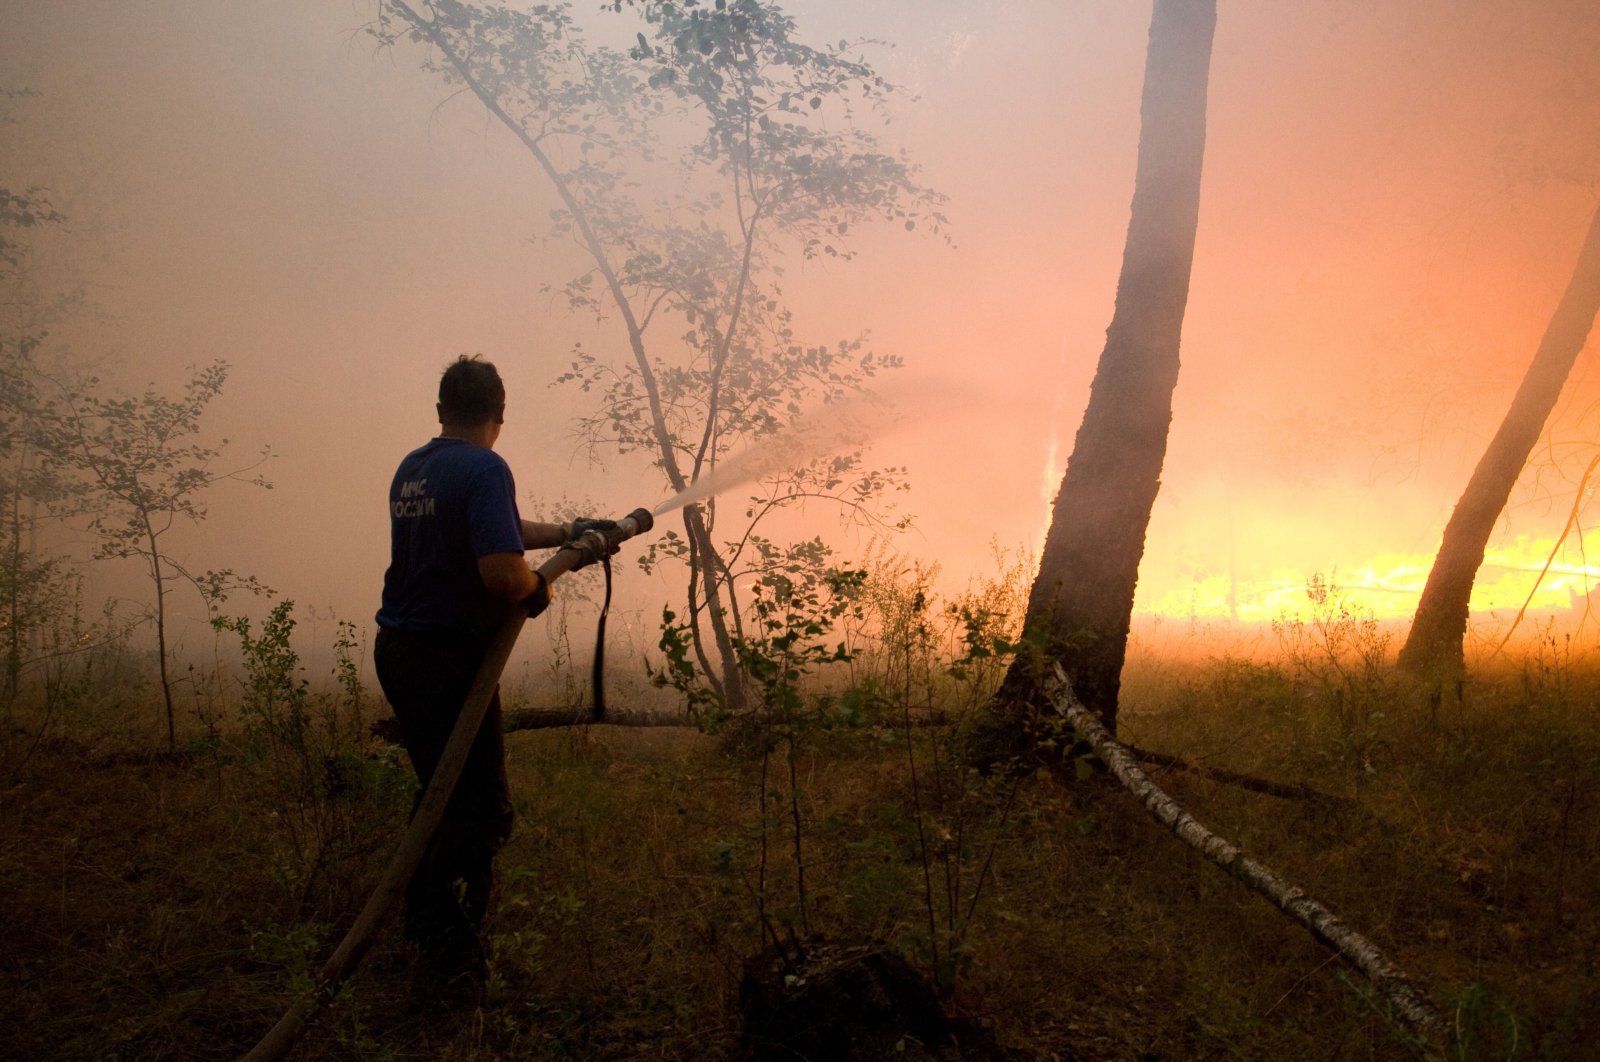 A fire fighter attempts to extinguish a forest fire near the village of Dolginino in the Ryazan region, some 180 km (111 miles) southeast of Moscow, Wednesday, Aug. 4, 2010. (AP Photo)